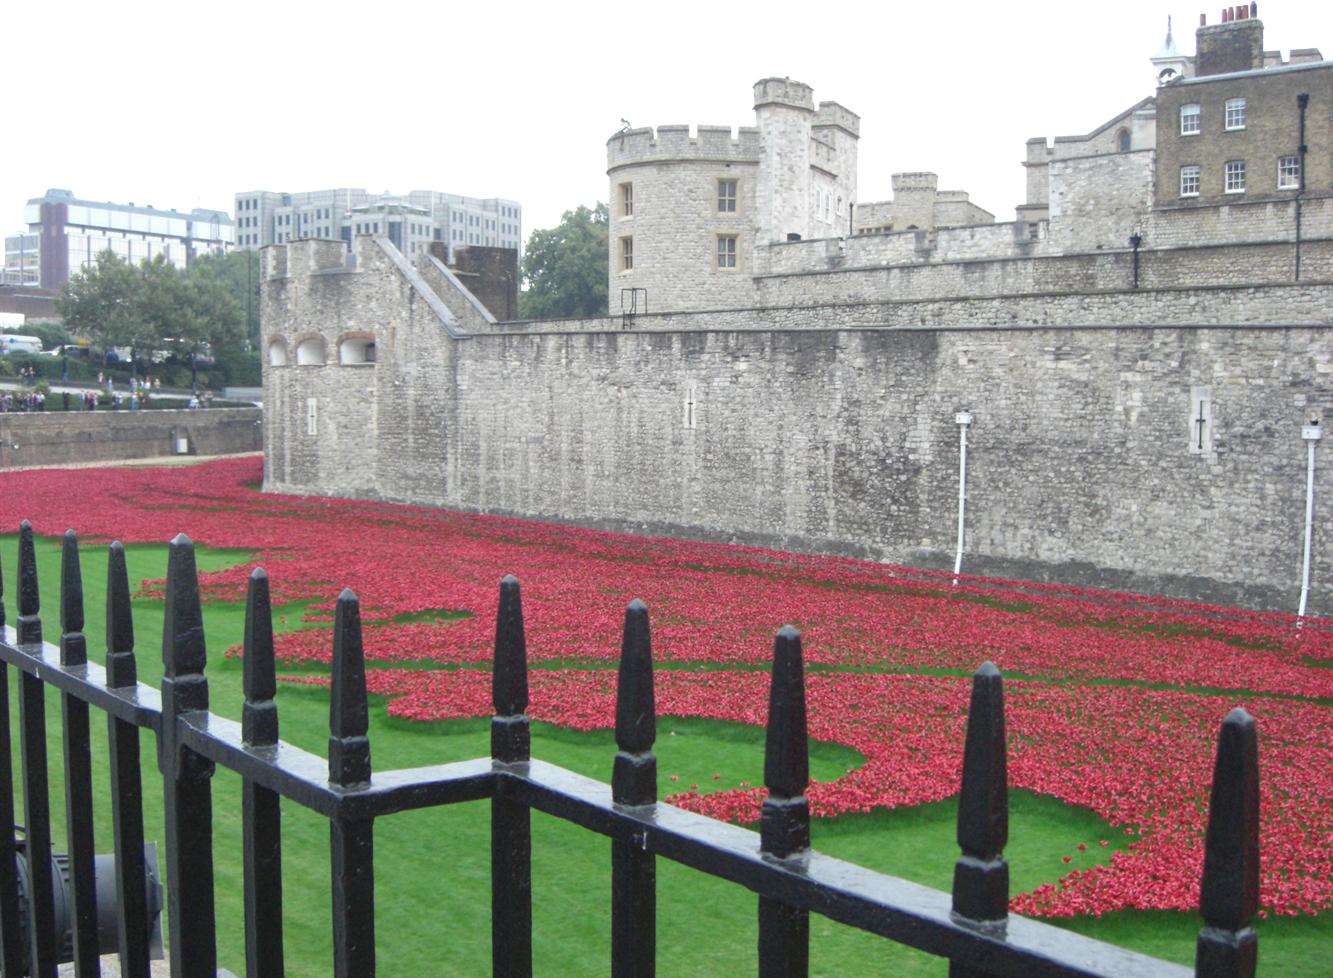 Ceramic poppies in the moat at the Tower of London for the project Blood Swept Lands and Seas of Red which marks the centenary anniversary of the First World War